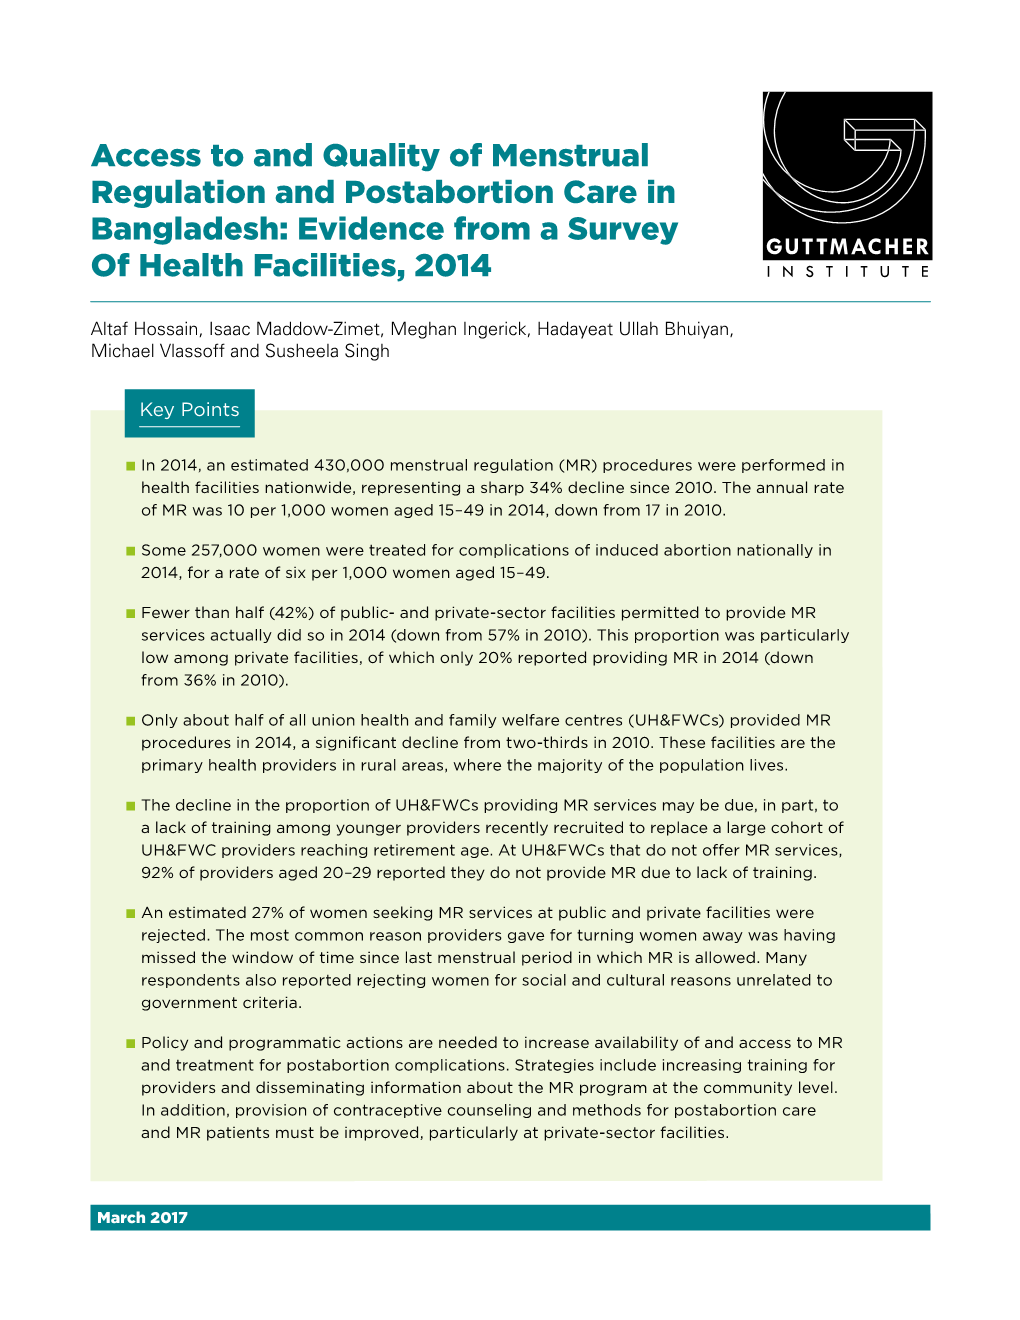 Access to and Quality of Menstrual Regulation and Postabortion Care in Bangladesh: Evidence from a Survey of Health Facilities, 2014